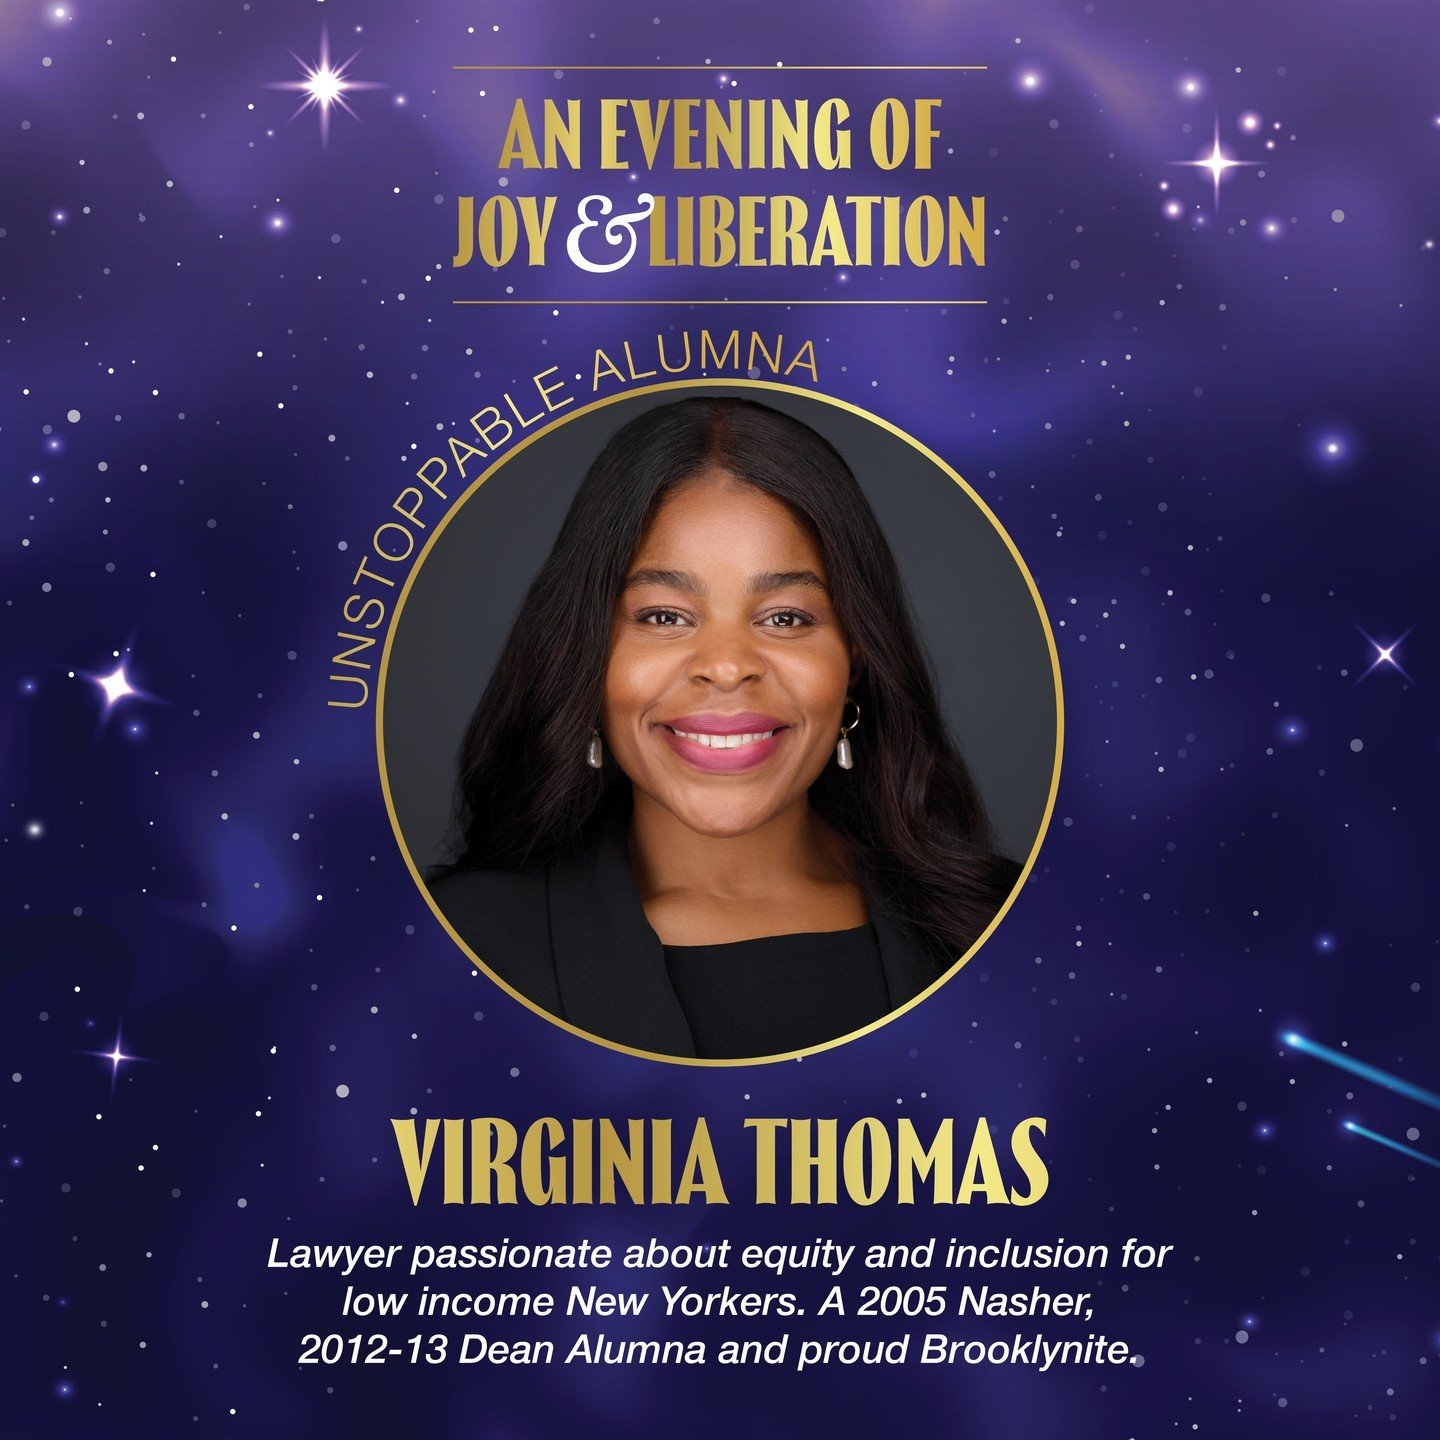 We are so excited to spotlight our Unstoppable Alumna recipient for this year&rsquo;s Evening of Joy &amp; Liberation! 

⭐ VIRGINIA THOMAS- Lawyer, Harvard Law School graduate, 2005 Nasher and 2012-13 Dean Alumna and proud Brooklynite.

Join us on Ju